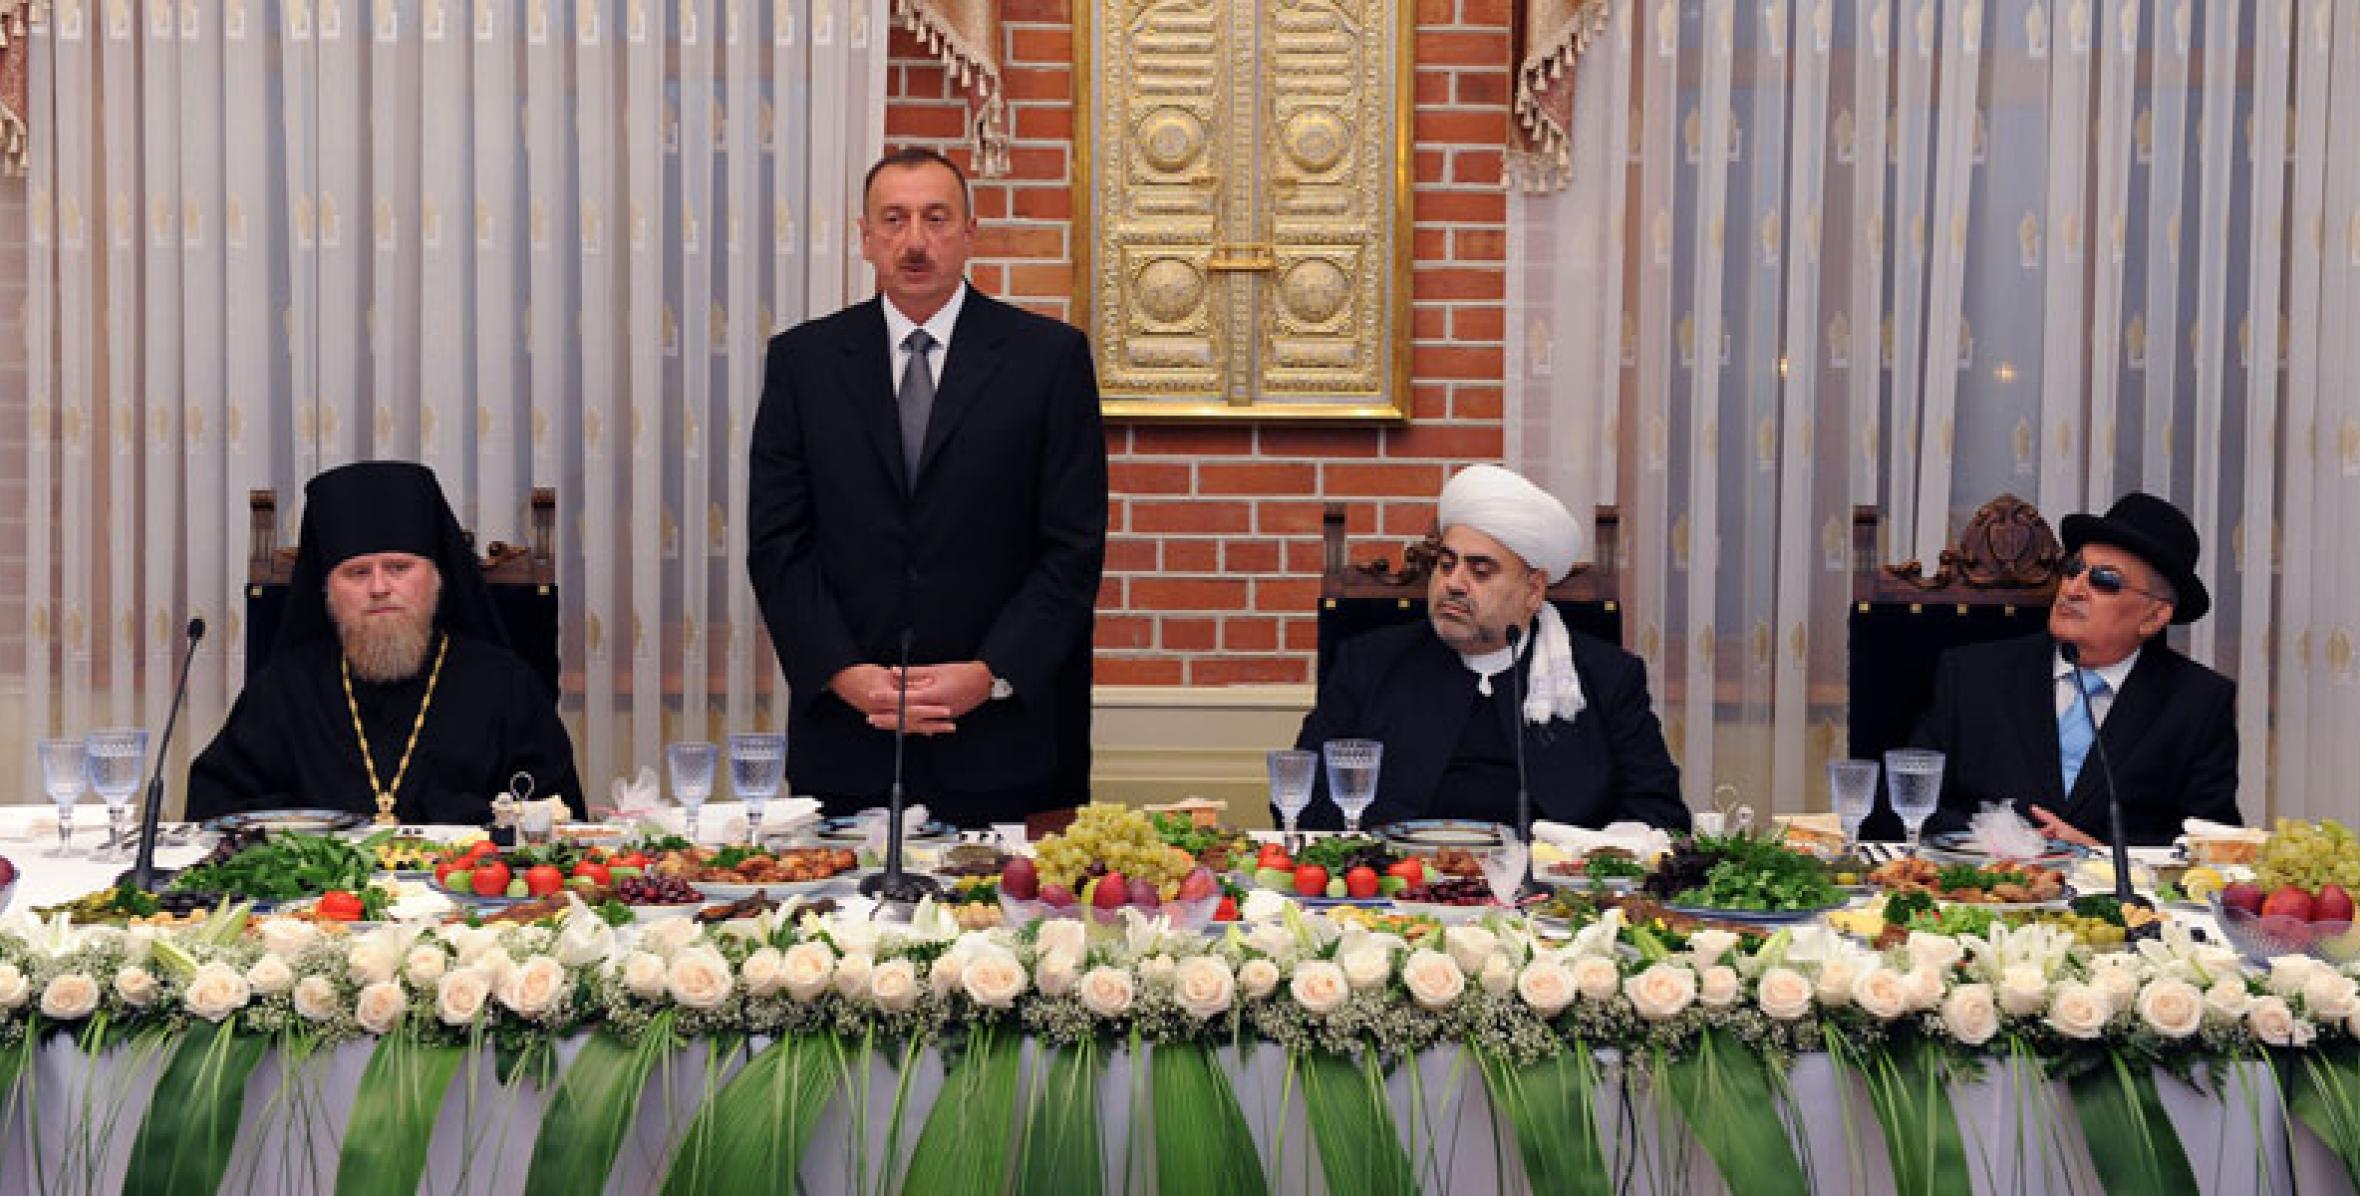 Speech by President Ilham Aliyev at the Iftar ceremony on the occasion of the Holy Month of Ramadan